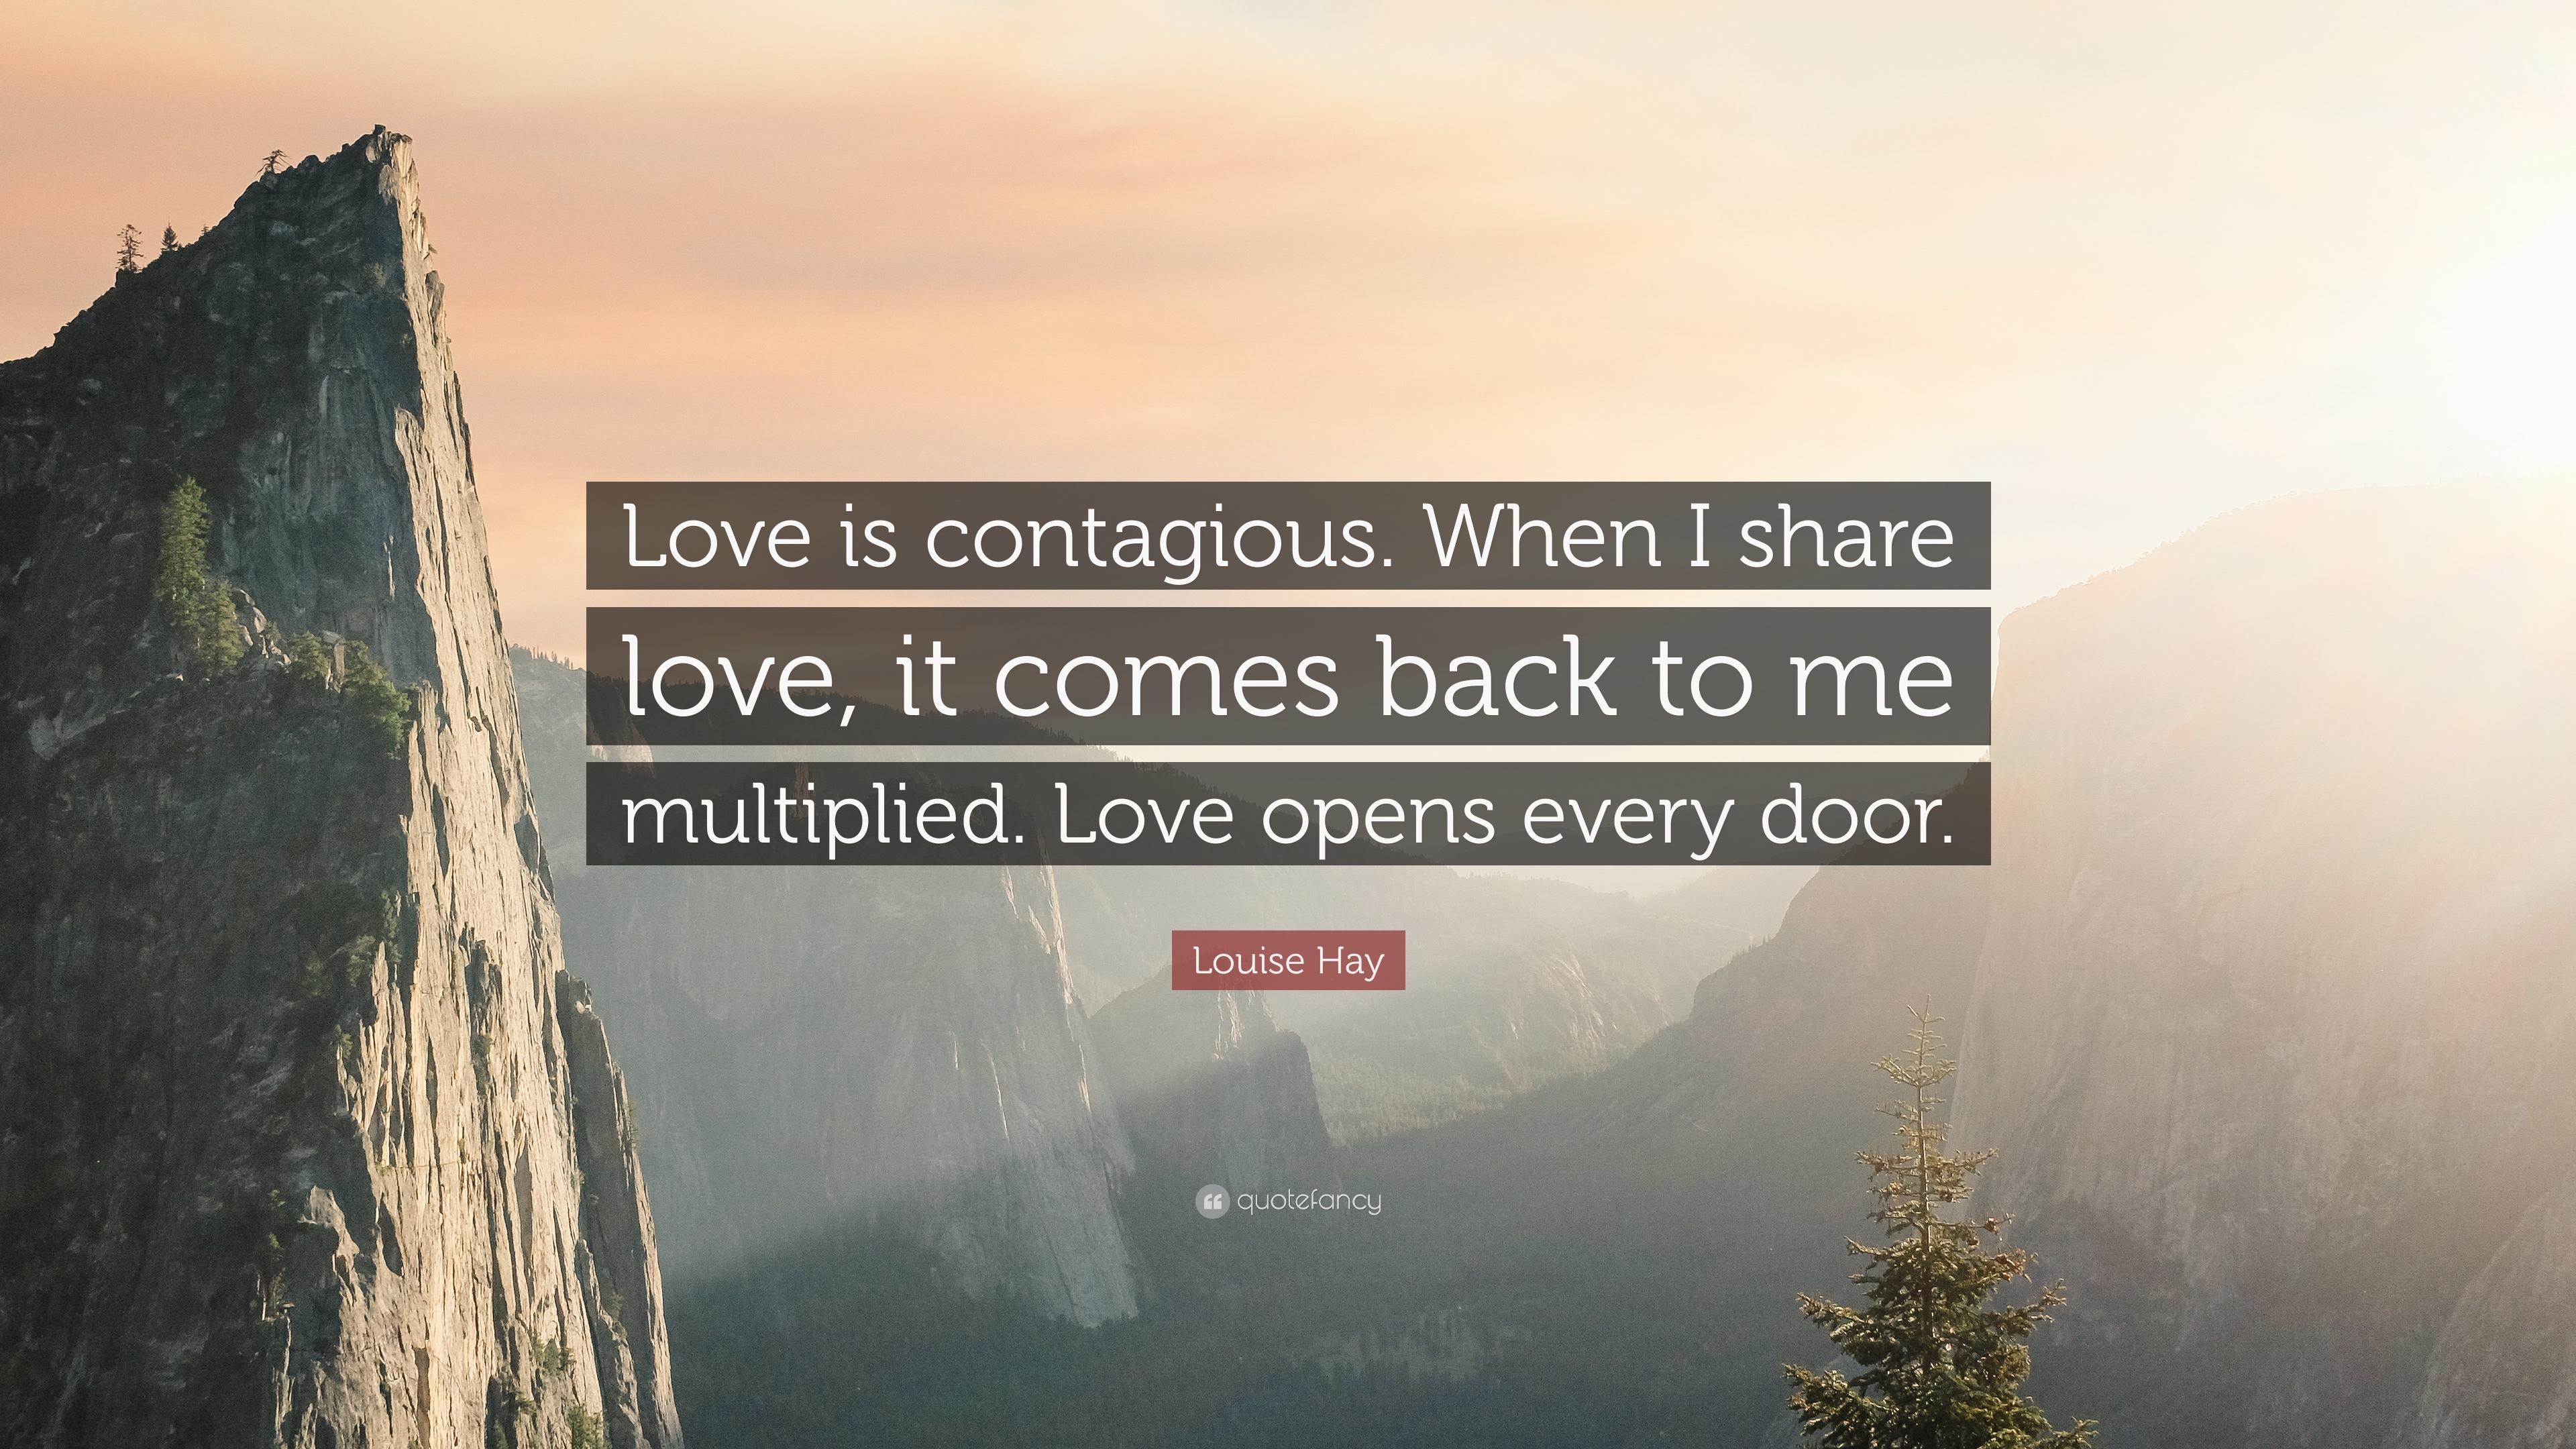 Louise Hay Quote: “Love is contagious. When I share love, it